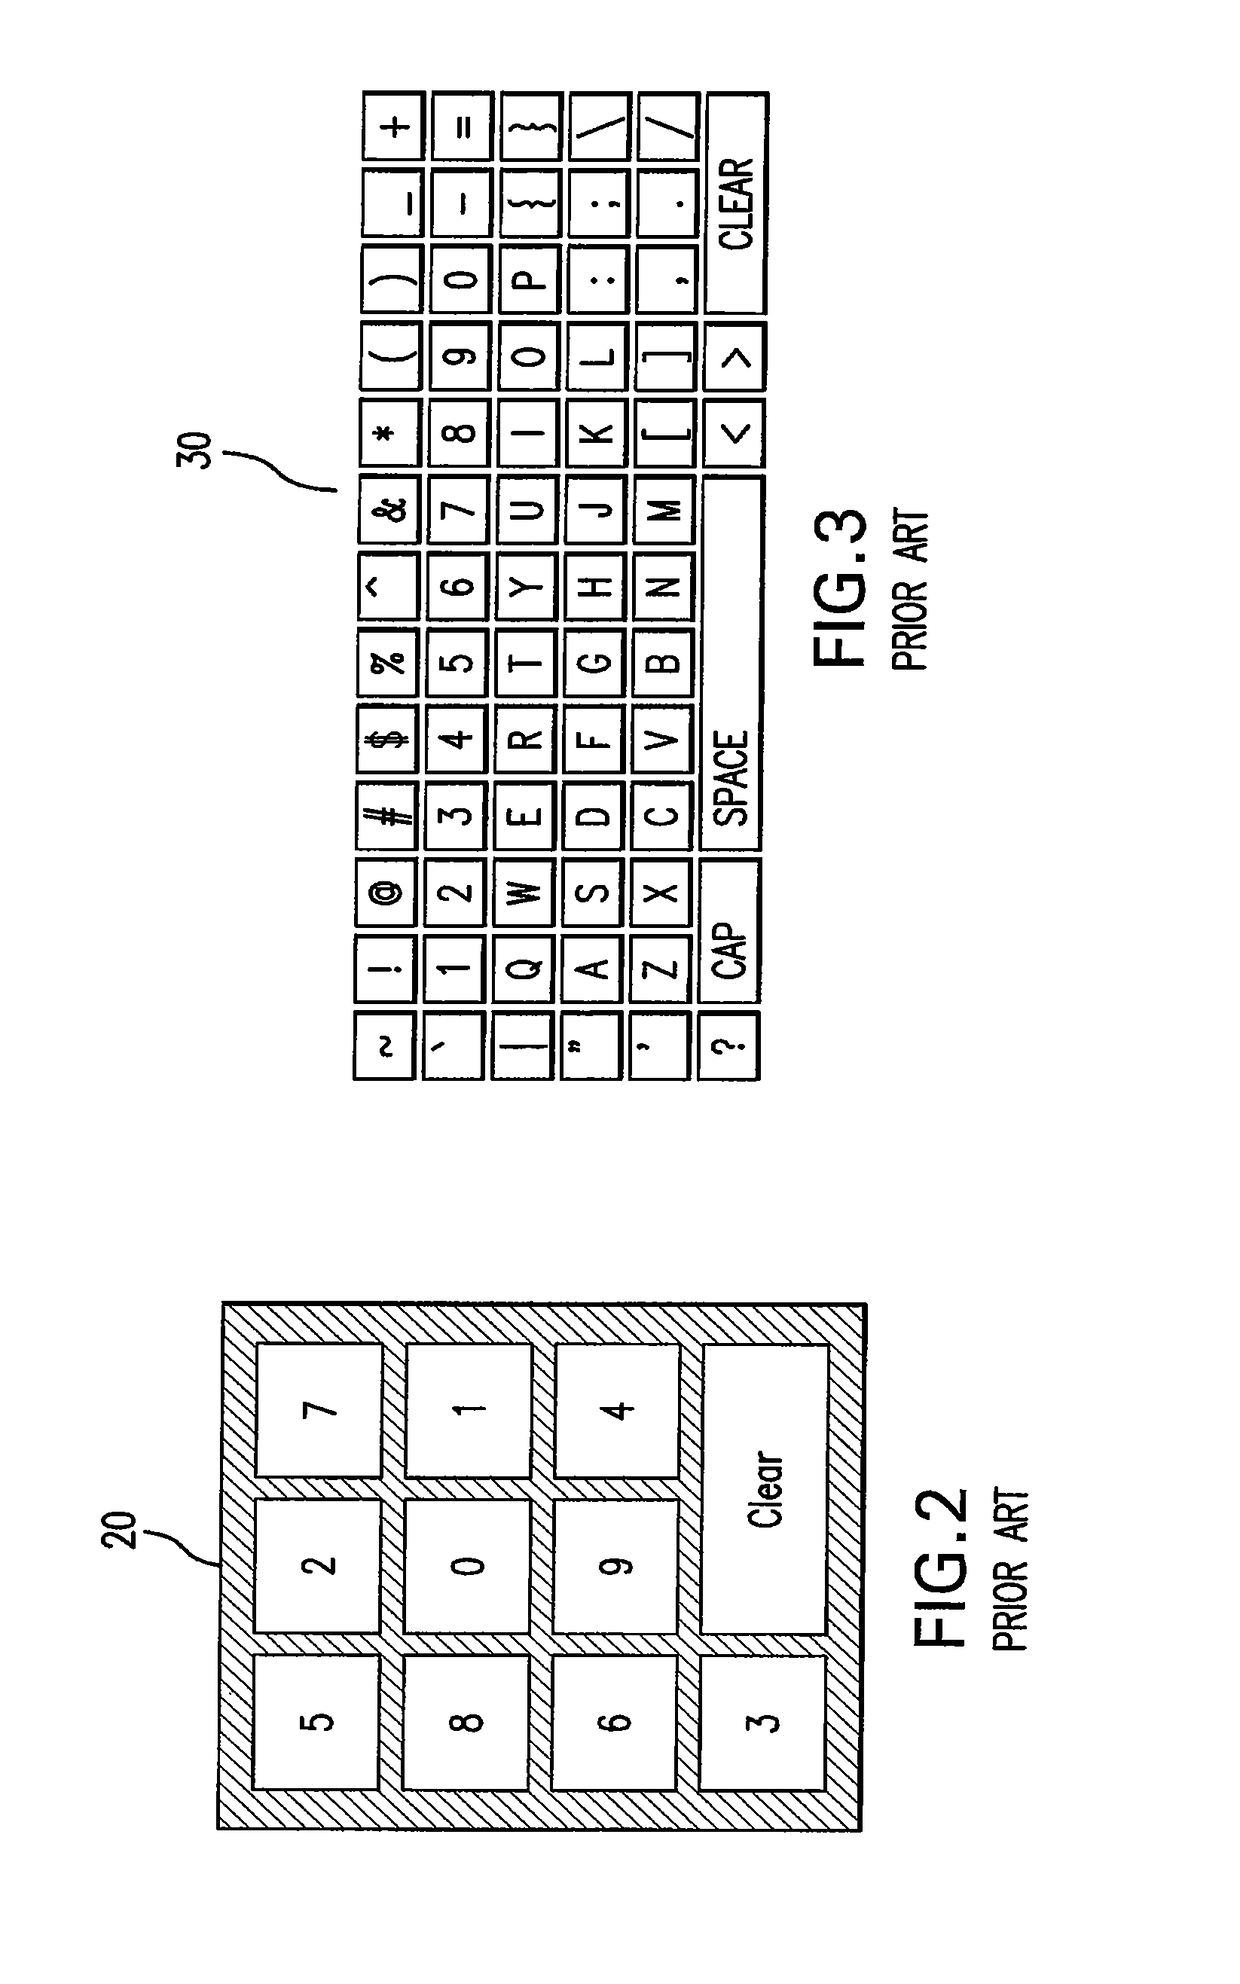 System and method for fraud monitoring, detection, and tiered user authentication